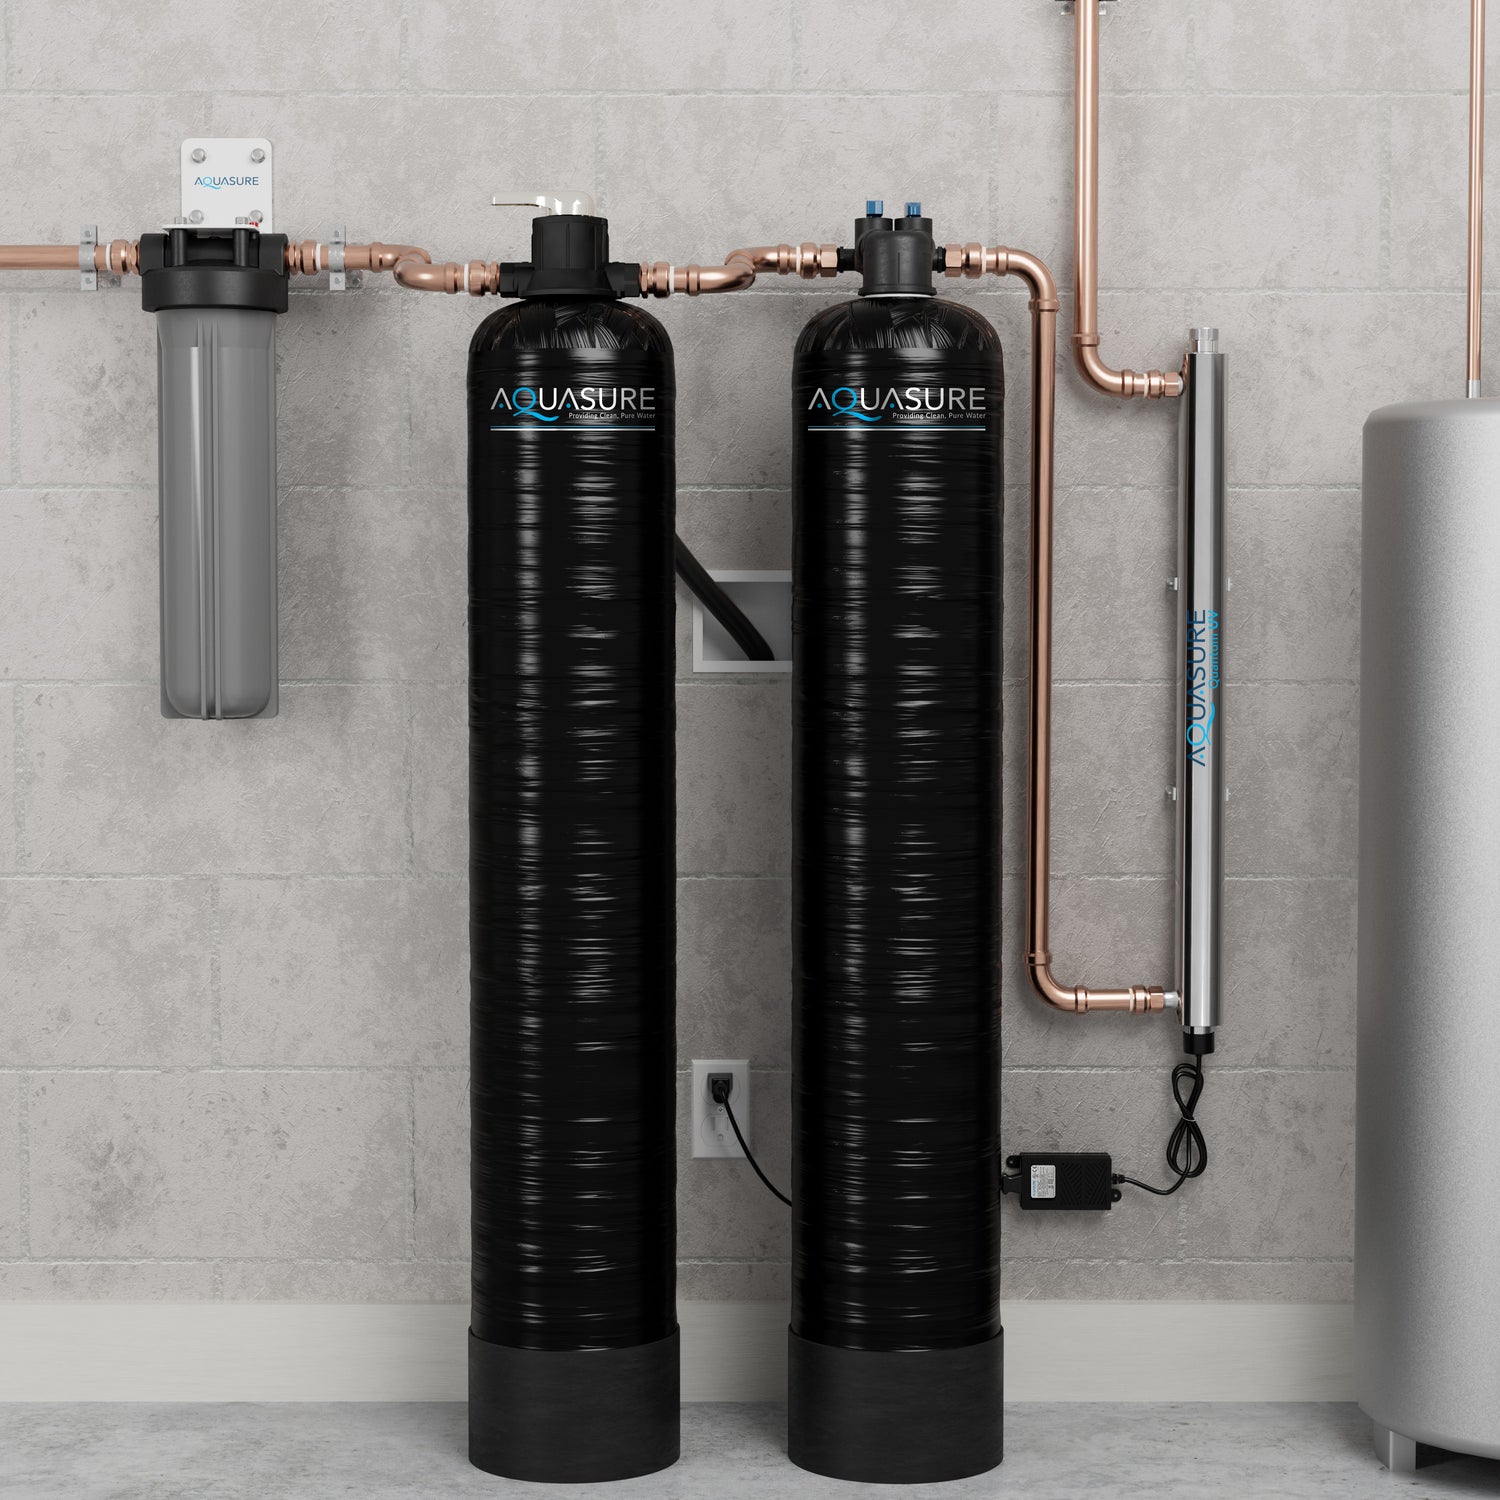 Serene Series | 15 GPM Salt-Free Conditioning, Whole House Water Treatment System, Pleated Sediment Pre-Filter and UV Purifier